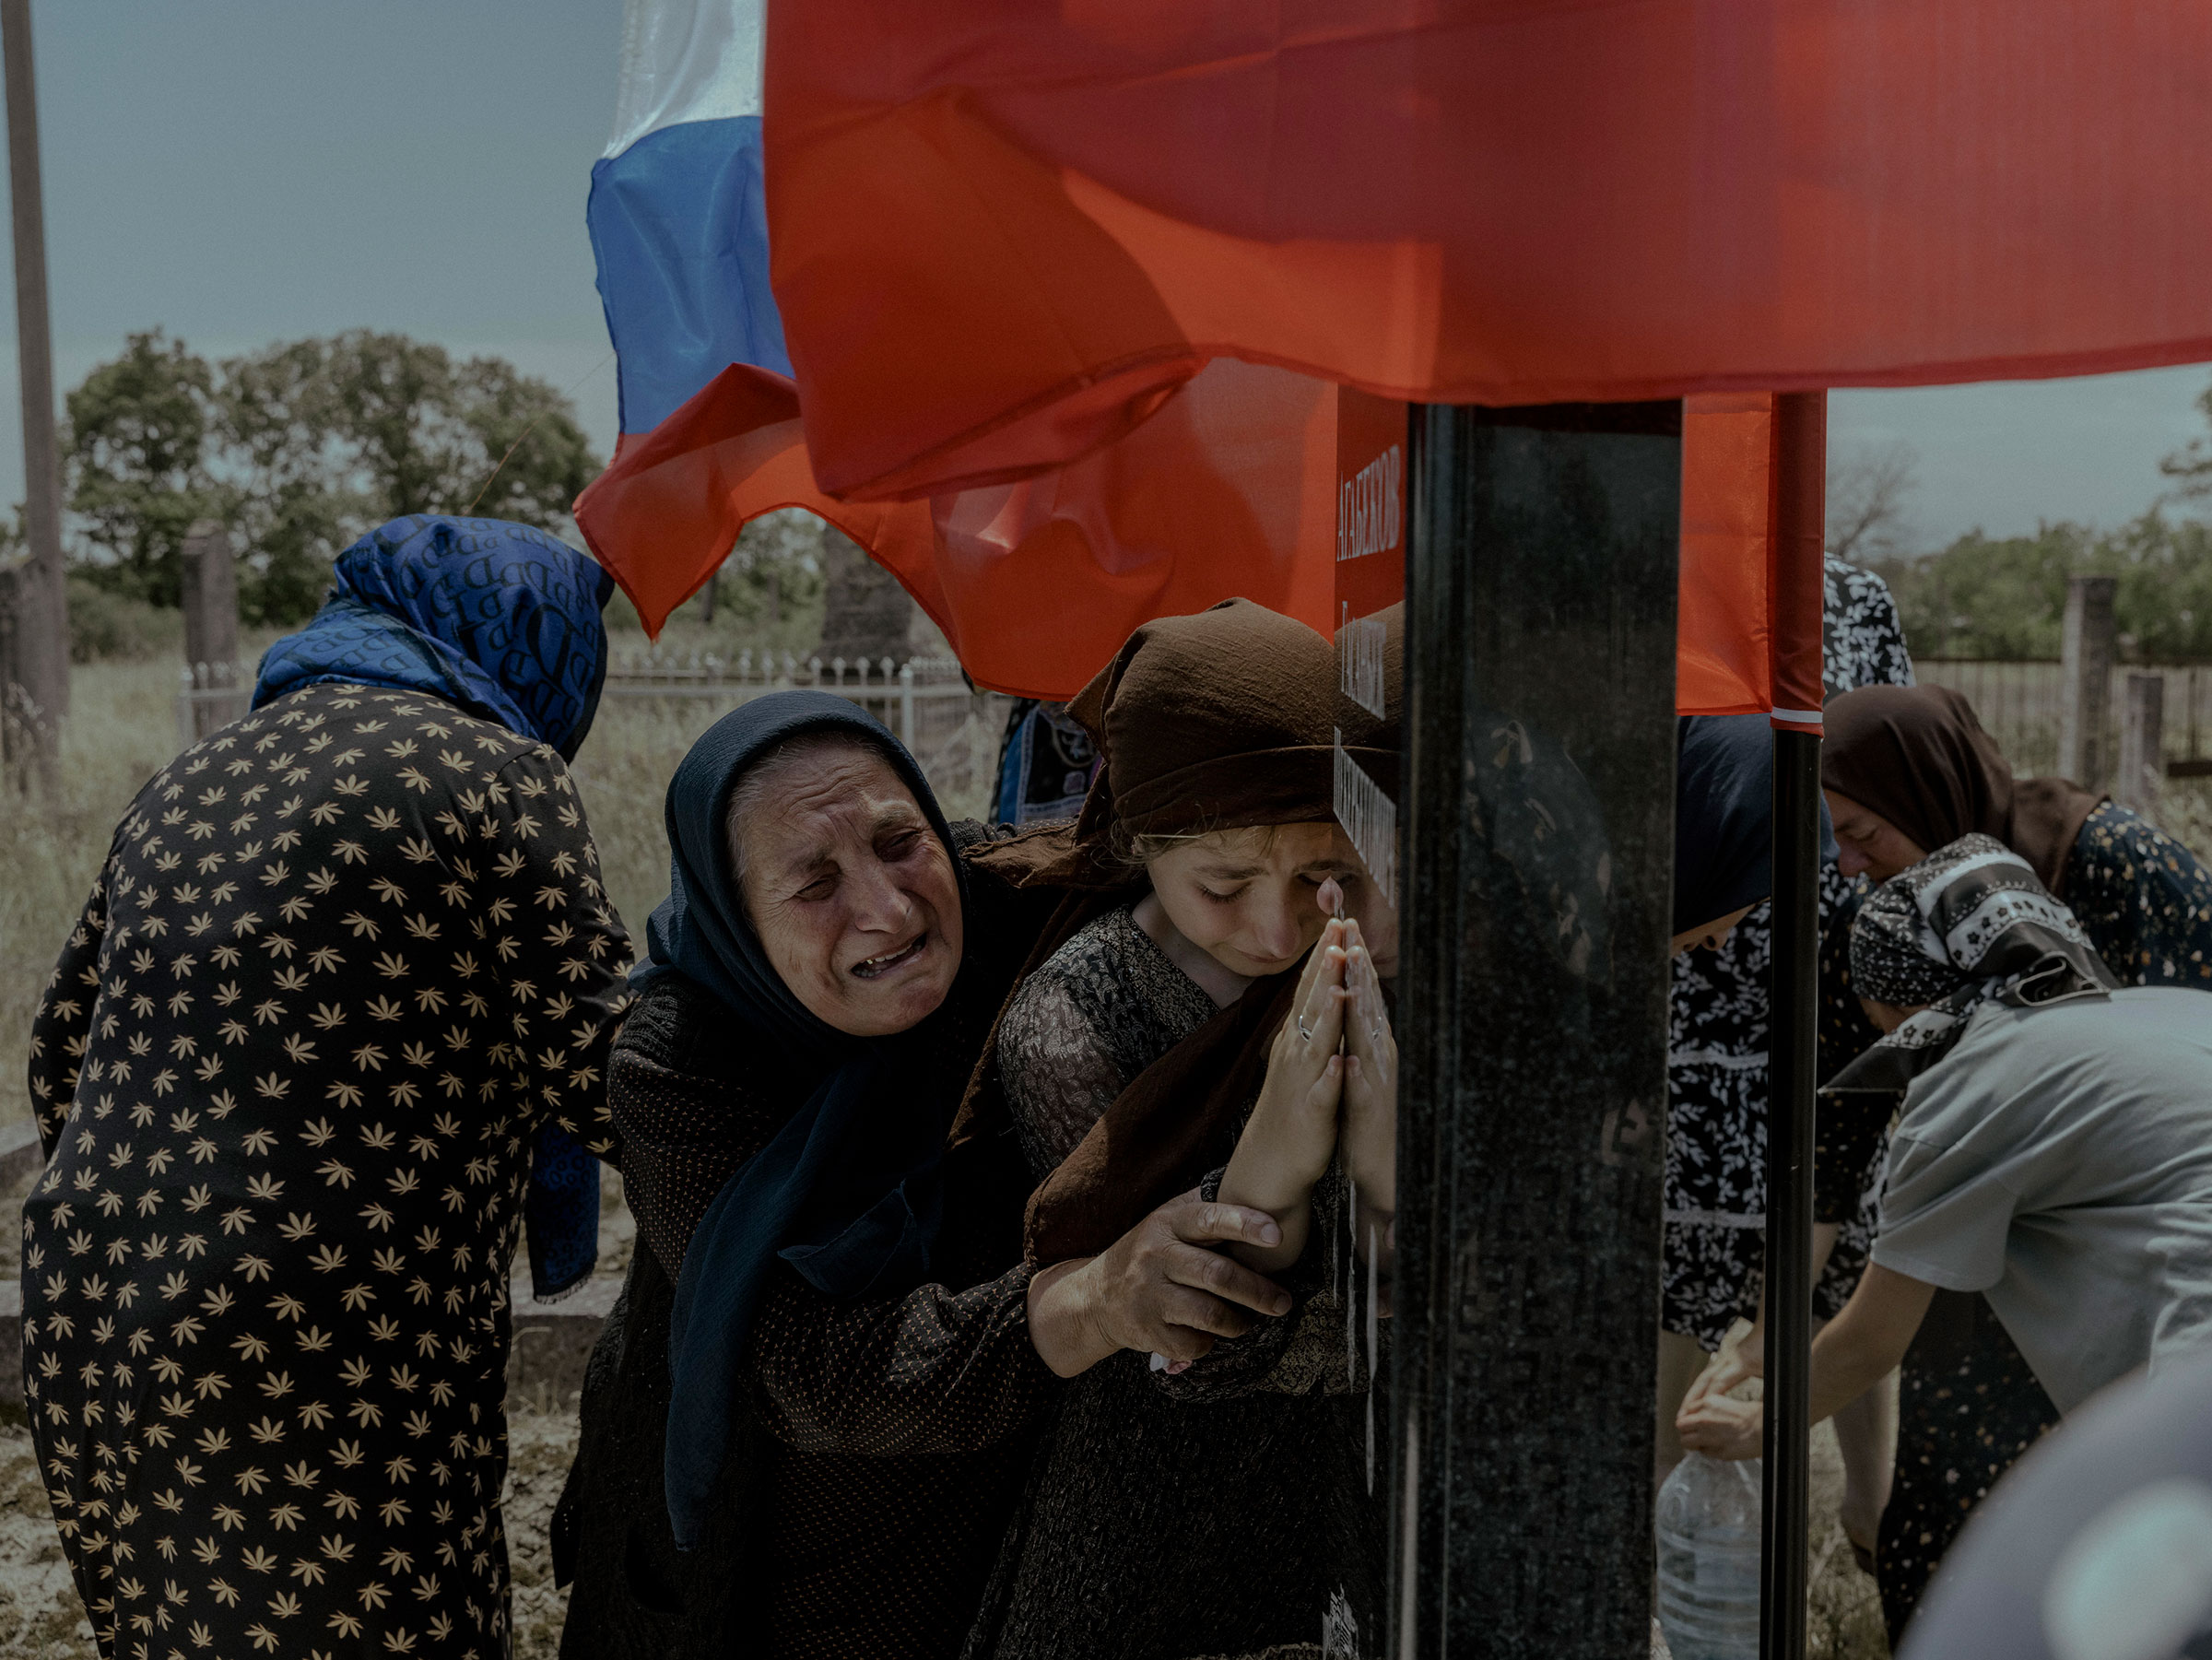 Women mourn the death of their family member and conscript soldier Gasanbek Agabekov, who was killed in Ukraine the 27th of May, in Aglobi, Dagestan, Russia, on June 16. In Dagestan, family members of the deceased meet at regular intervals to grieve. An imam said that fifteen other men from Gasanbek’s area had died in the war. The republic that has seen the highest number of casualties in the war in Ukraine is also one of poorest republics in Russia. (Nanna Heitmann—Magnum Photos)